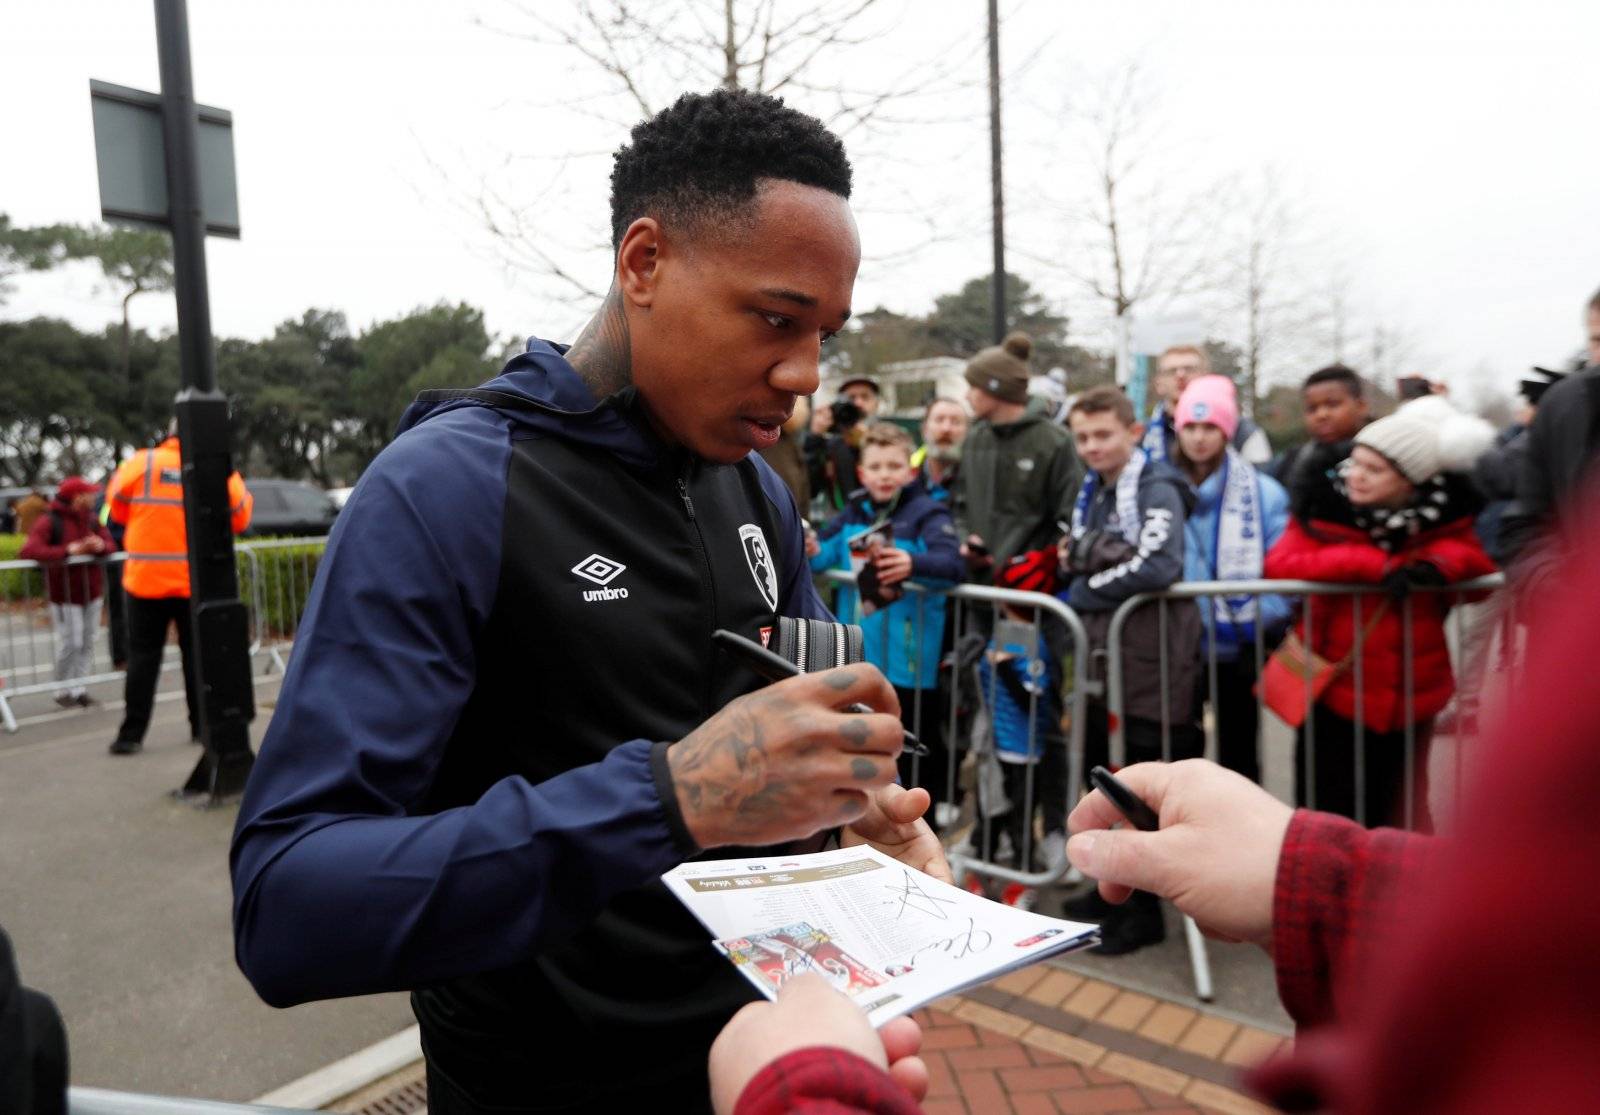 Crystal Palace: Fans react as Bordeaux are interested in Nathaniel Clyne - Crystal Palace